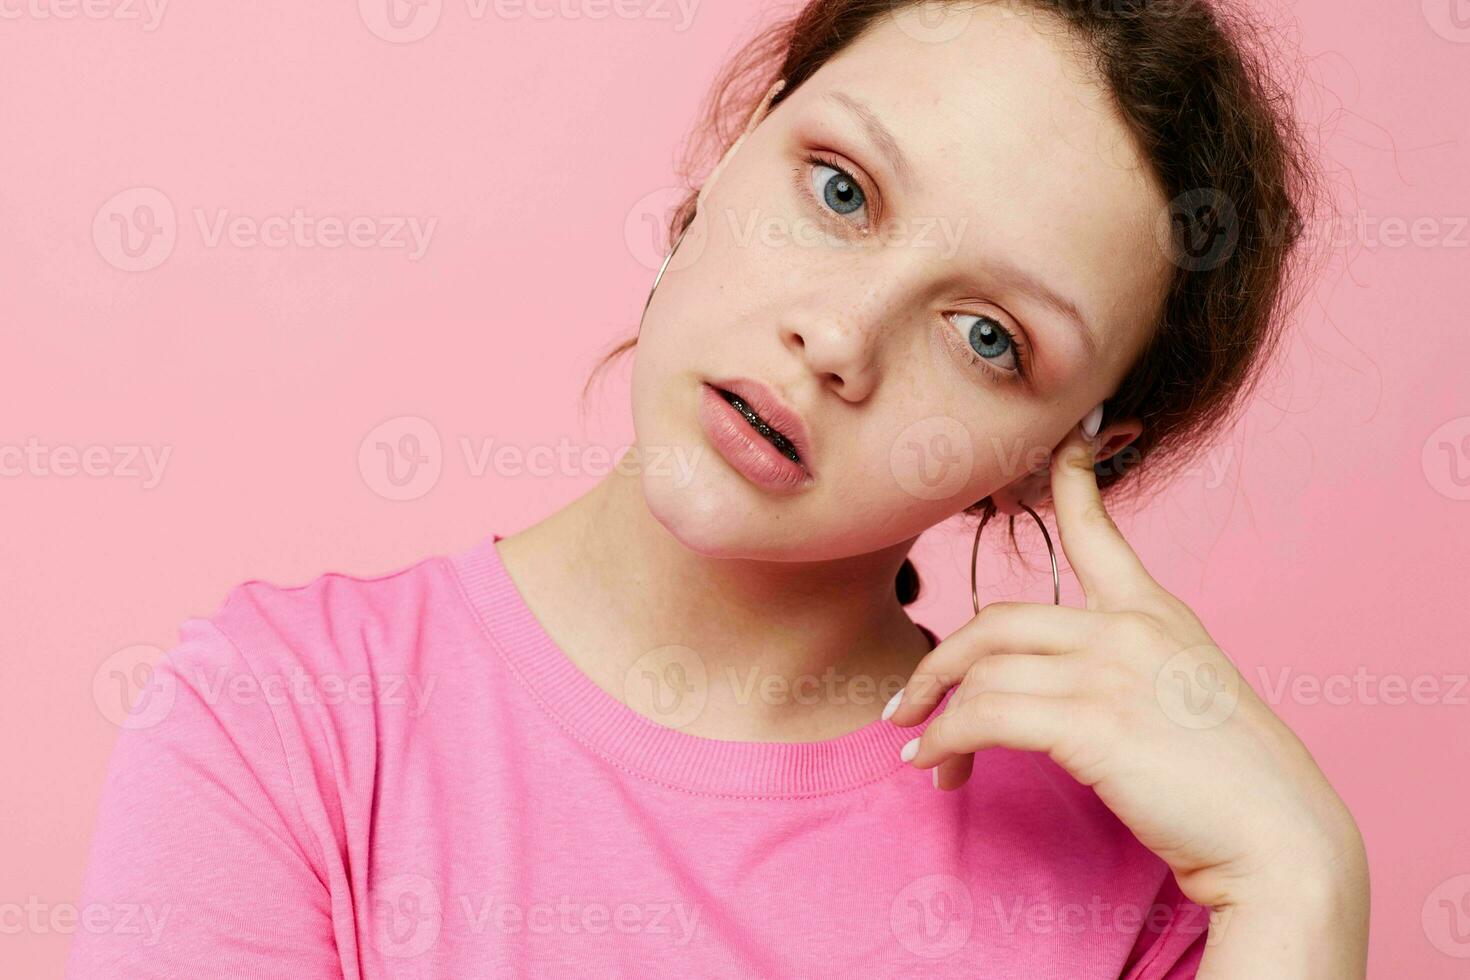 attractive young woman fashion pink t-shirt decoration posing Lifestyle unaltered photo